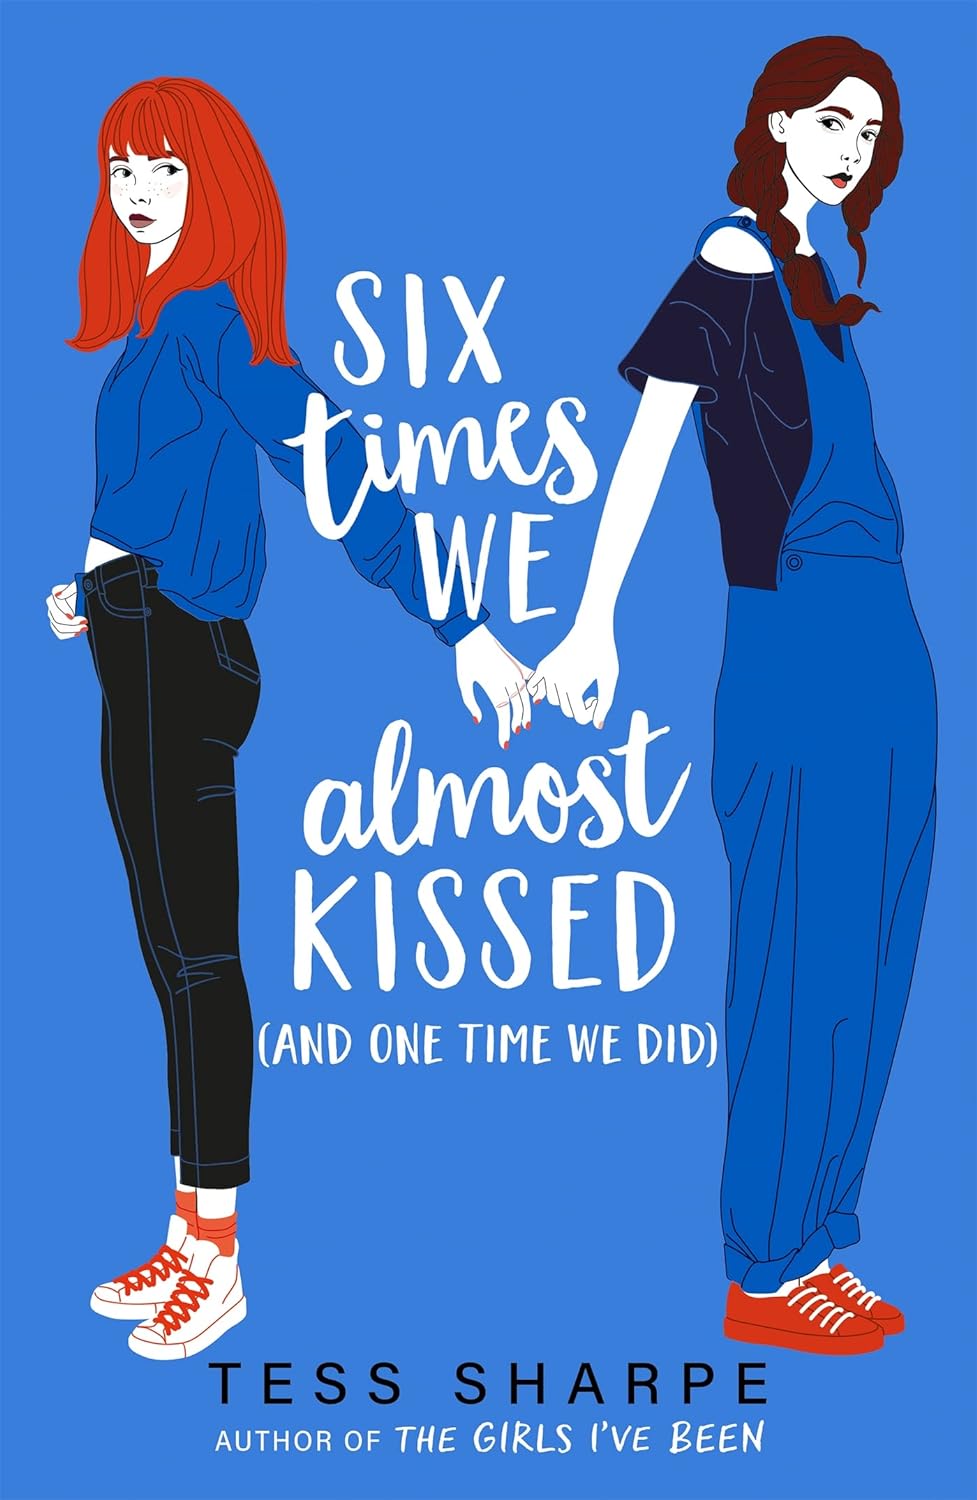 Six Times We Almost Kissed (And One Time We Did) (used.) by Tess Sharpe